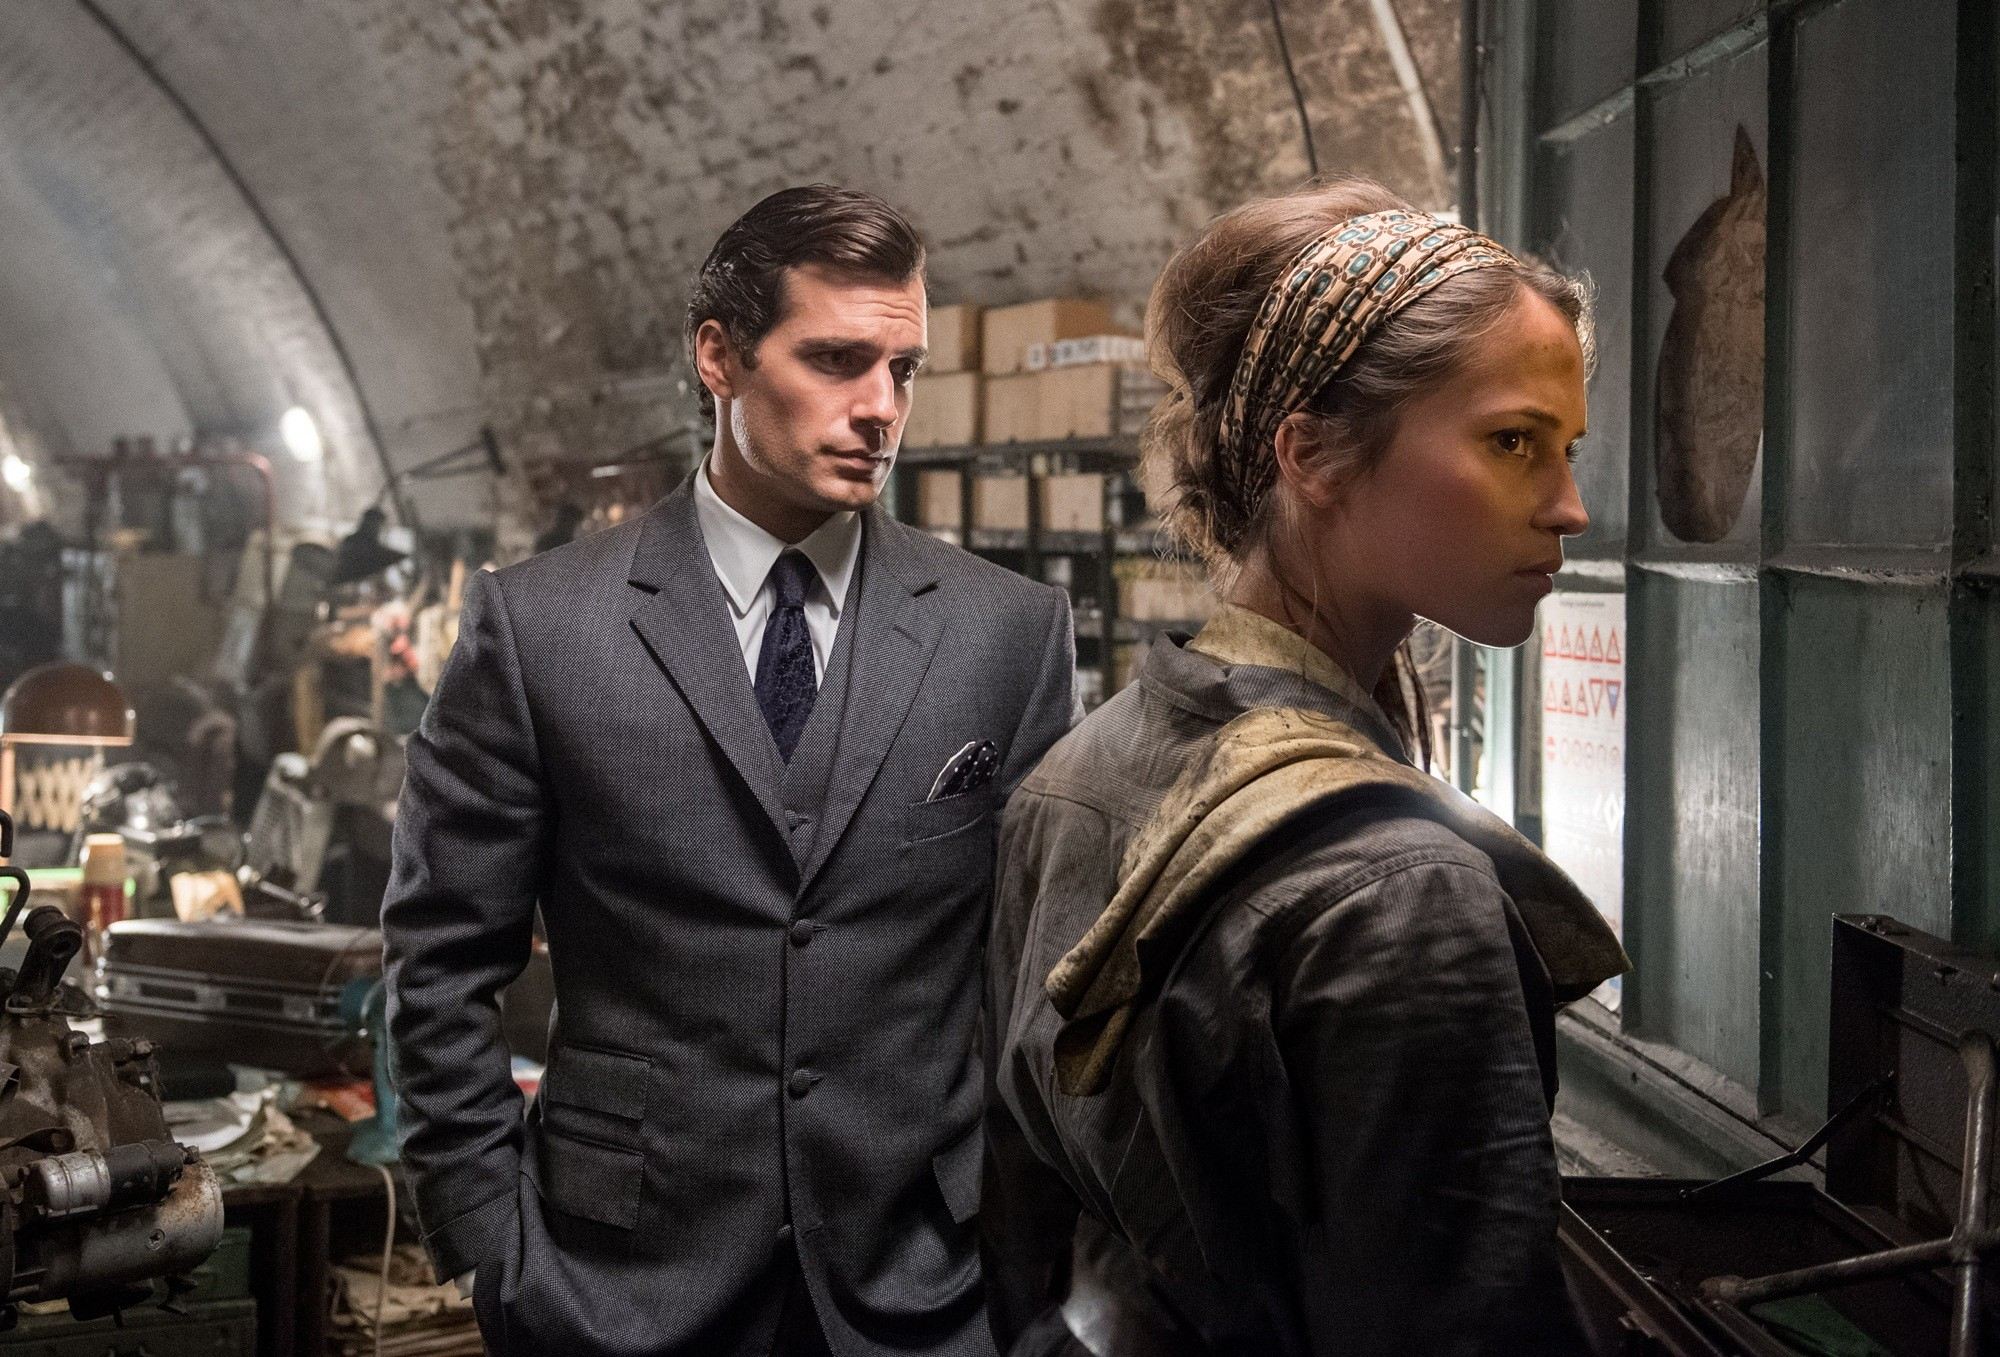 Henry Cavill stars as Napoleon Solo and Alicia Vikander stars as Gaby Teller in Warner Bros. Pictures' The Man from U.N.C.L.E. (2015)